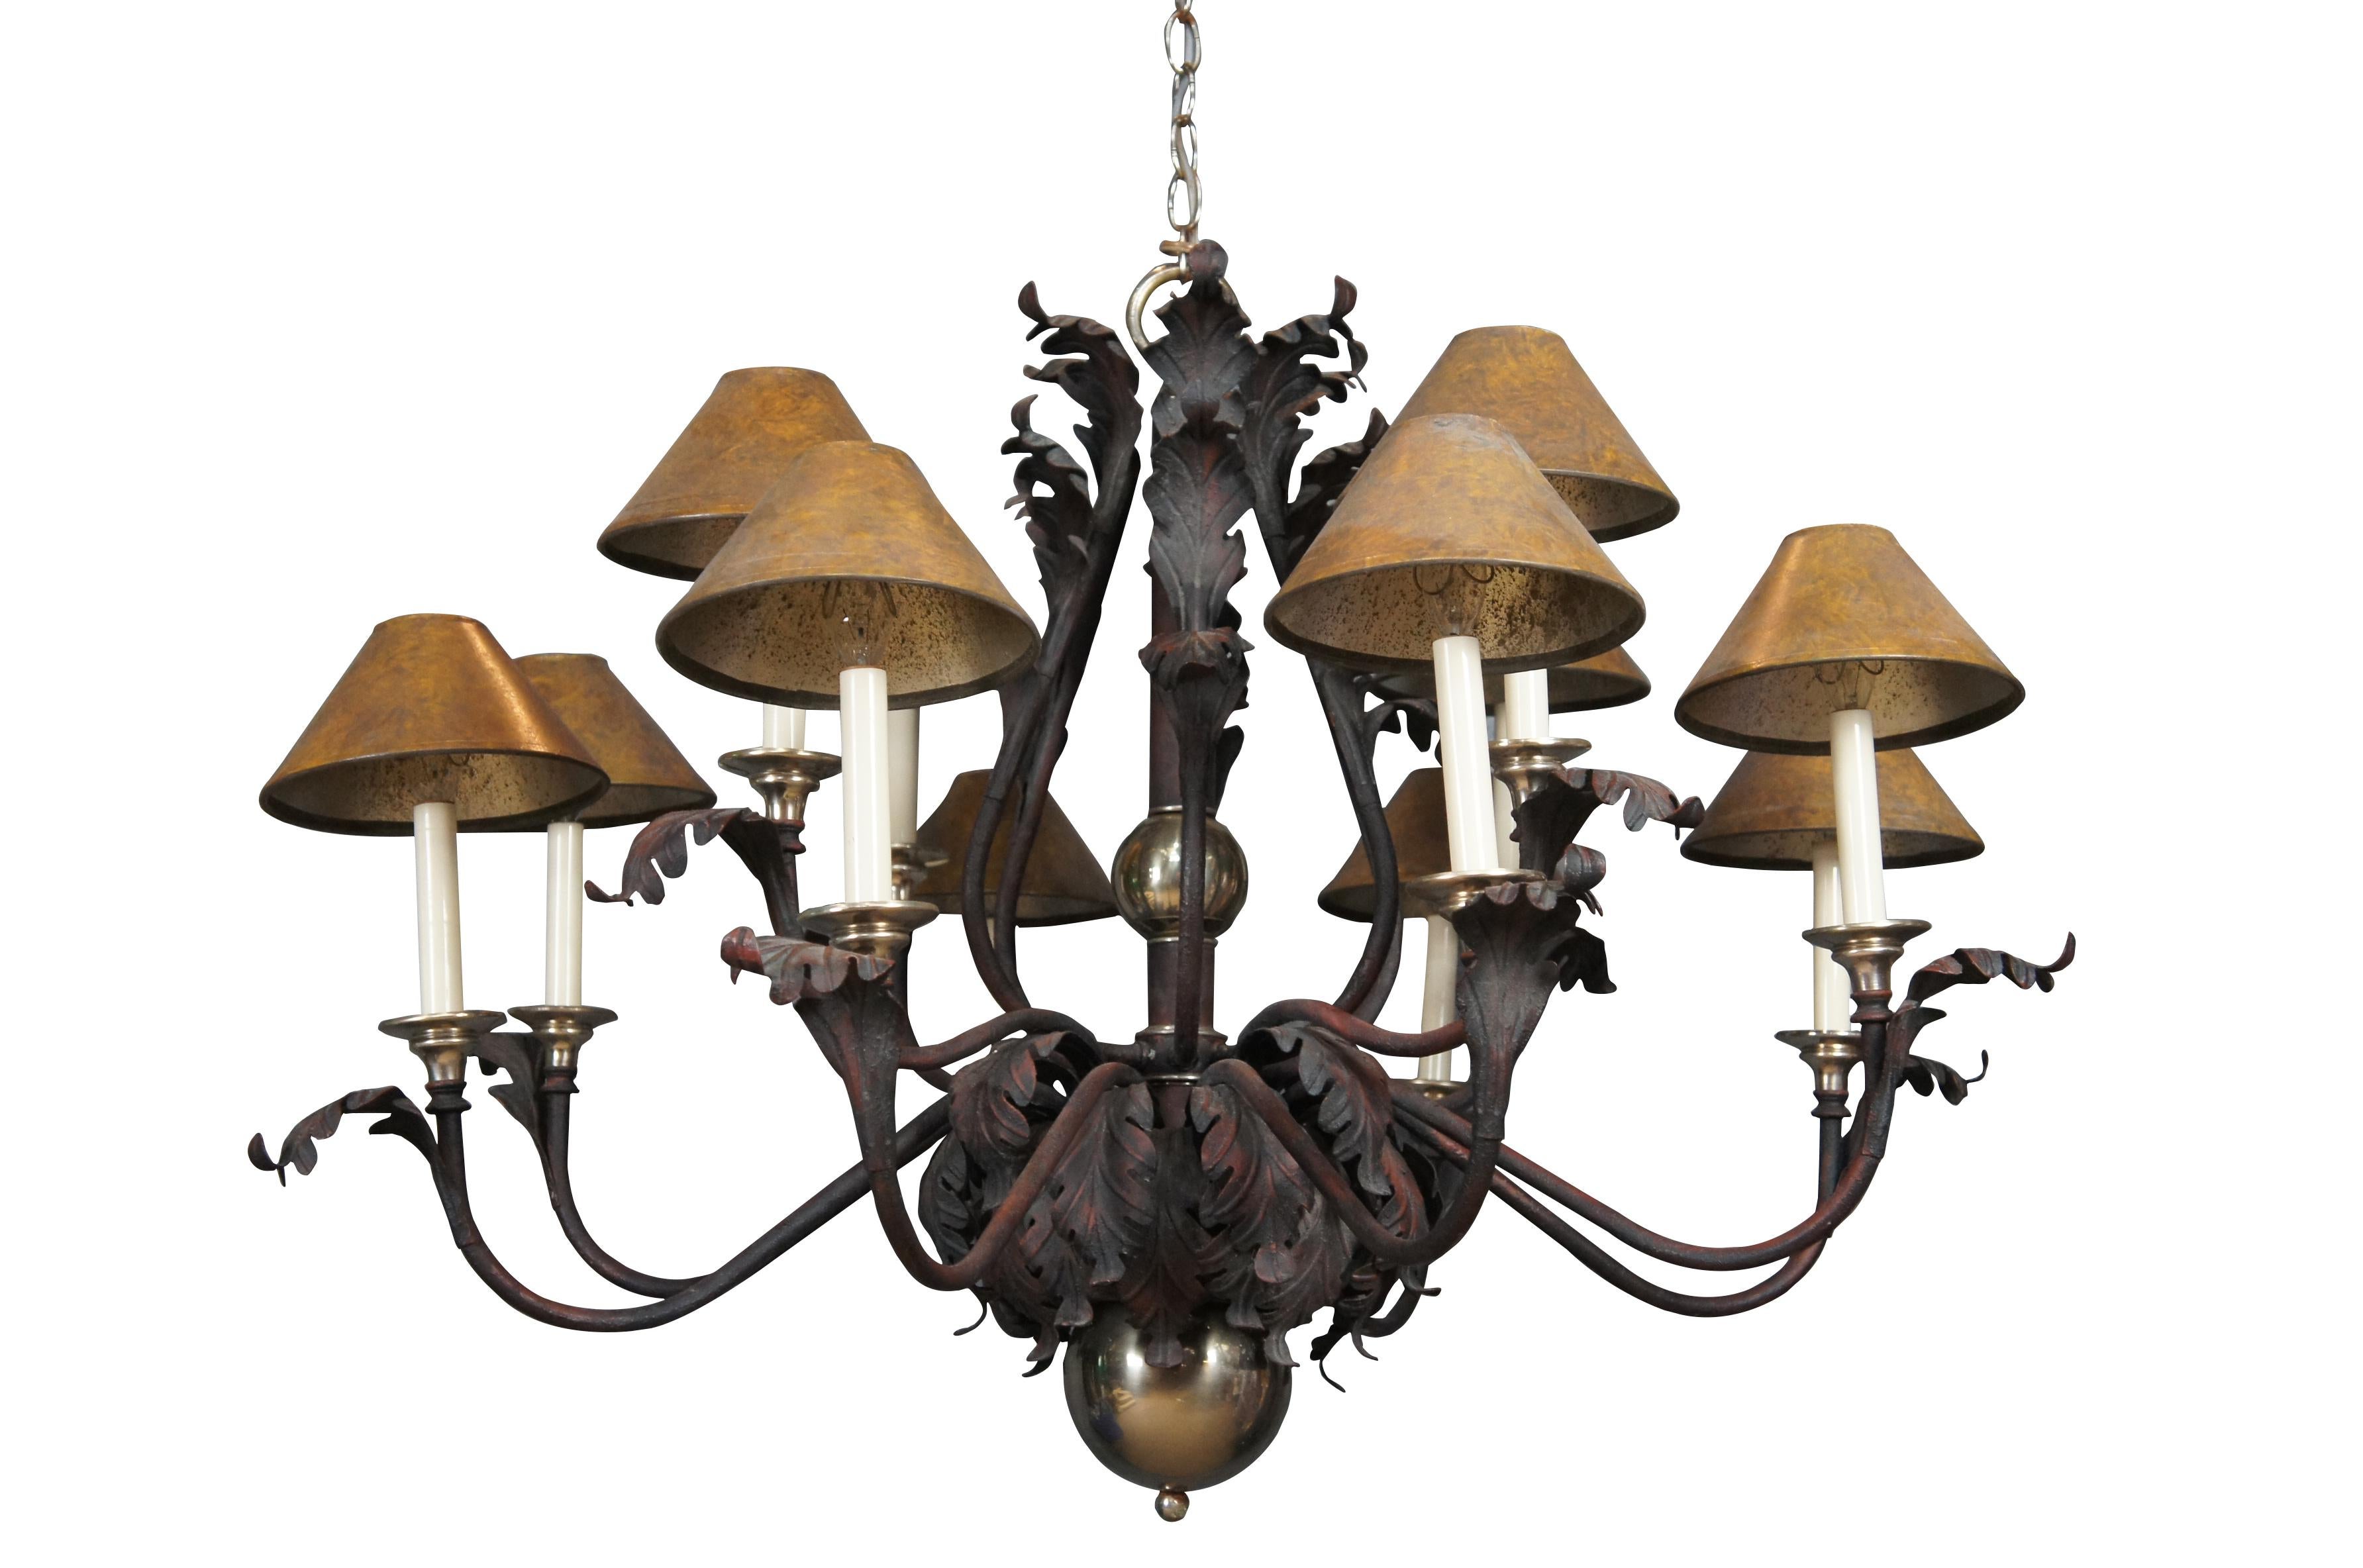 Hart Associates scrolled iron chandelier featuring French acanthus leaf design with twelve candlestick lights and shades, and brass accents..

Dimensions:
44